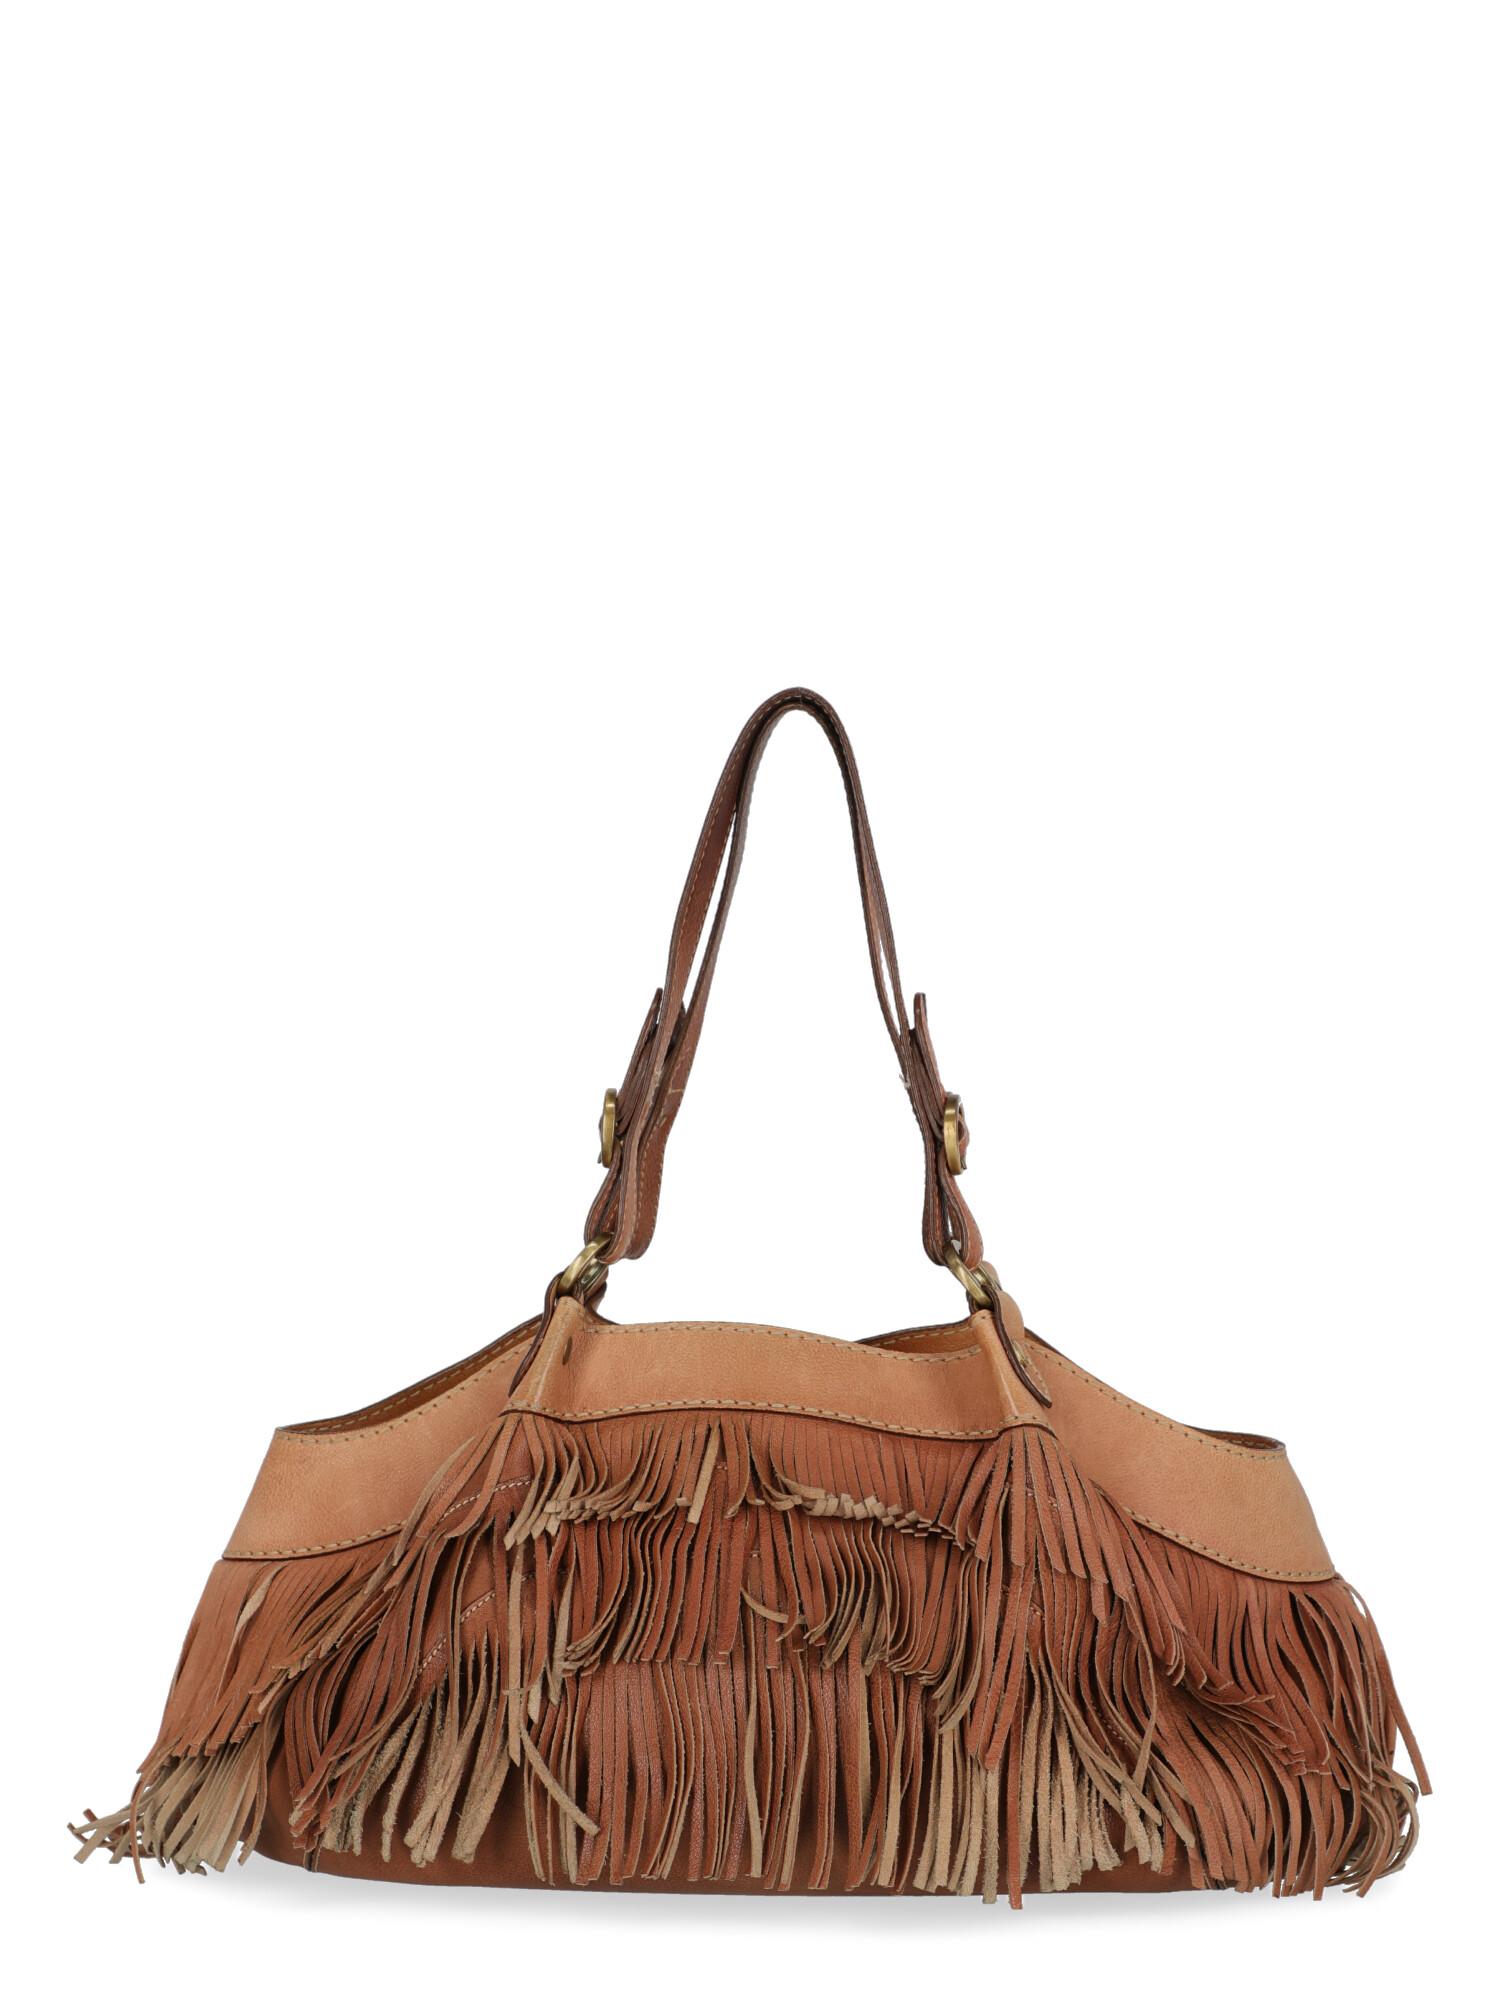 Hogan  Women   Shoulder bags  Camel Color Leather  In Good Condition For Sale In Milan, IT